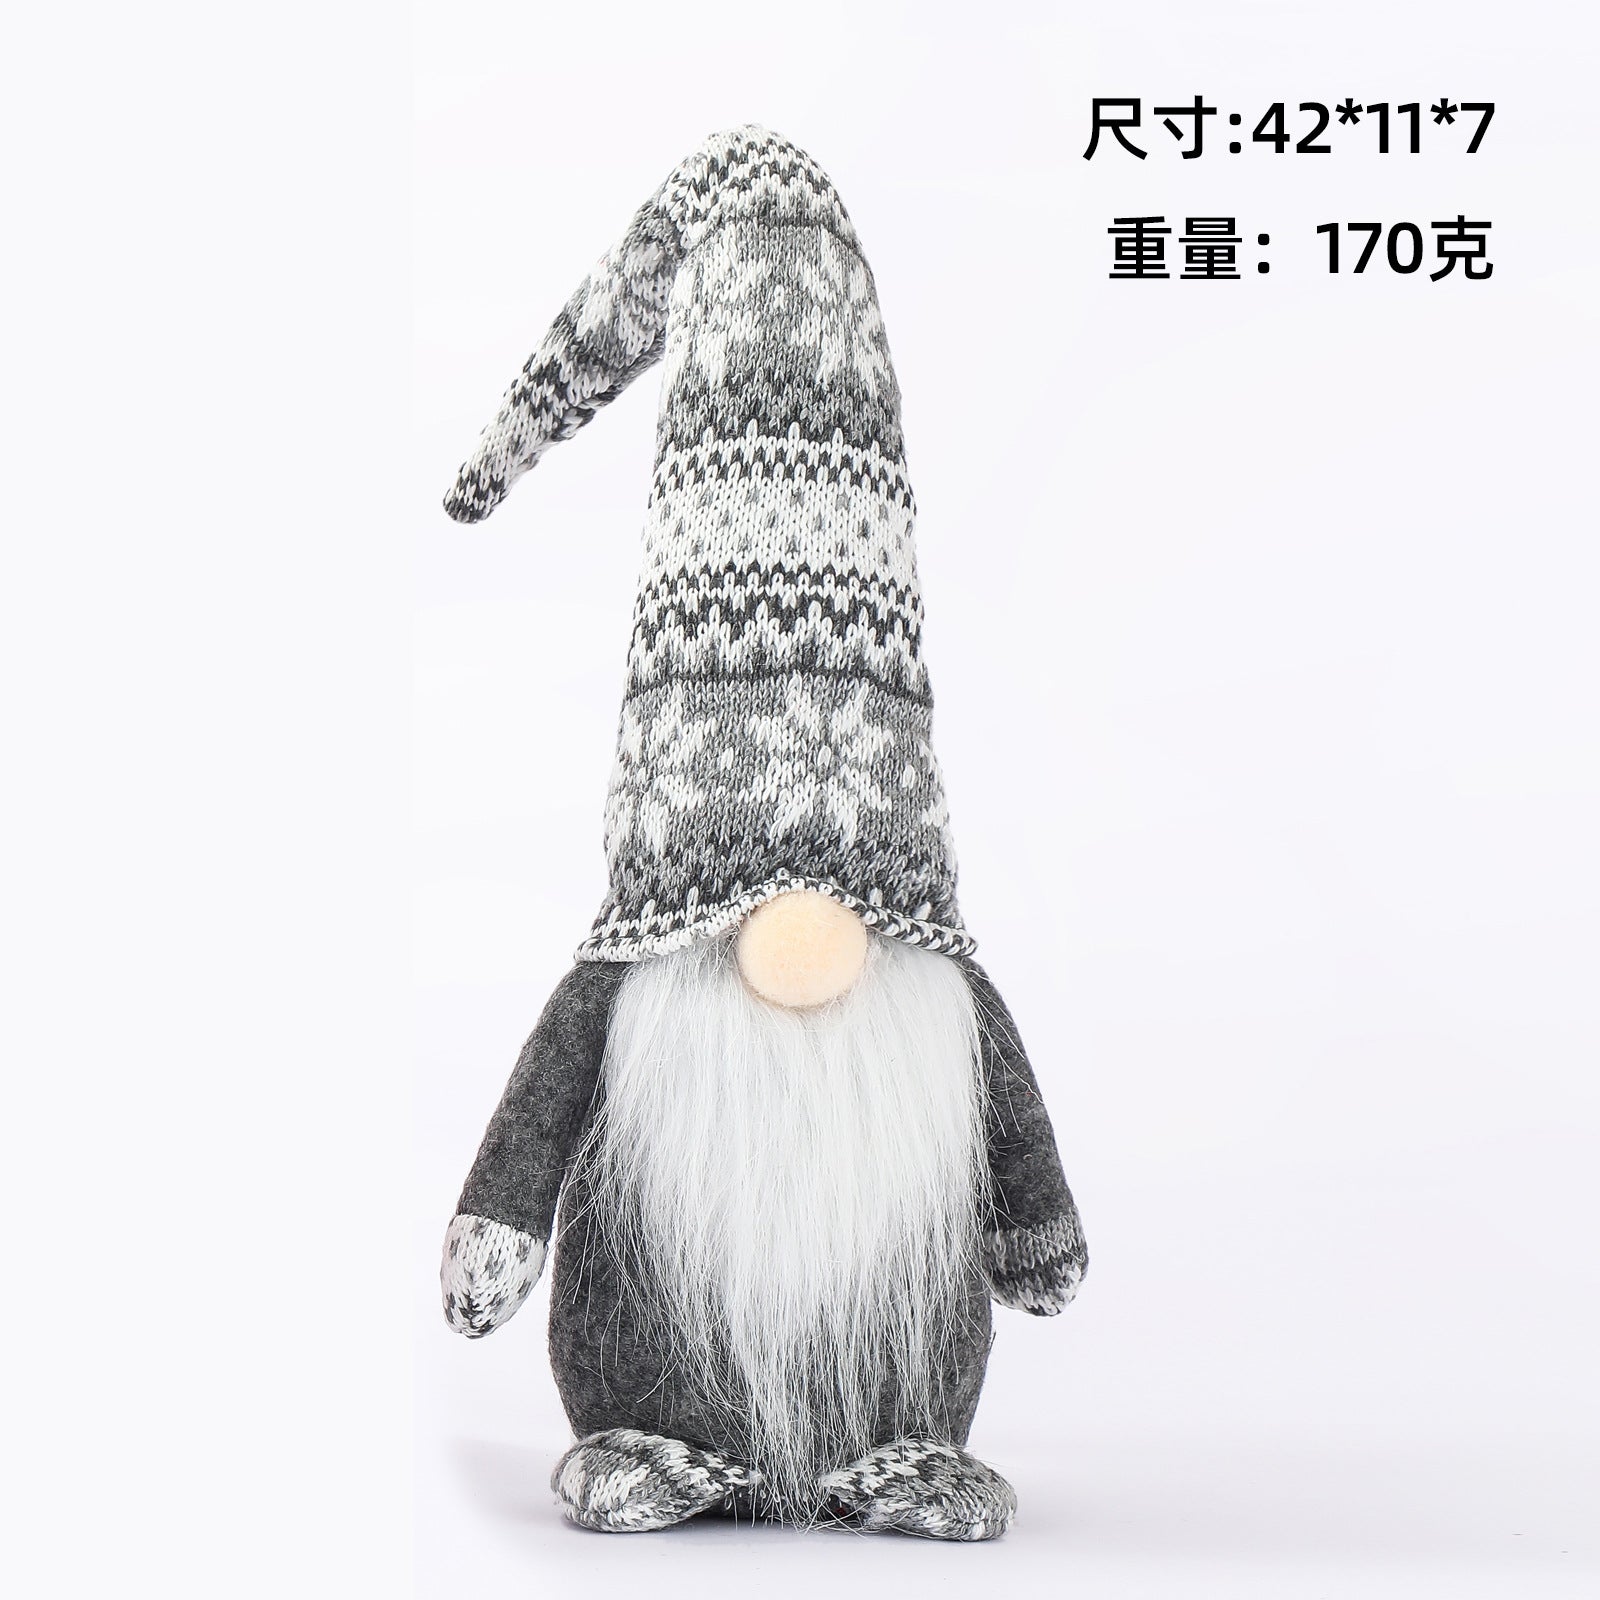 Wholesale Ornament Fabric Faceless Old Man Wool Old Man Window Ornament JWE-OS-ChiY003